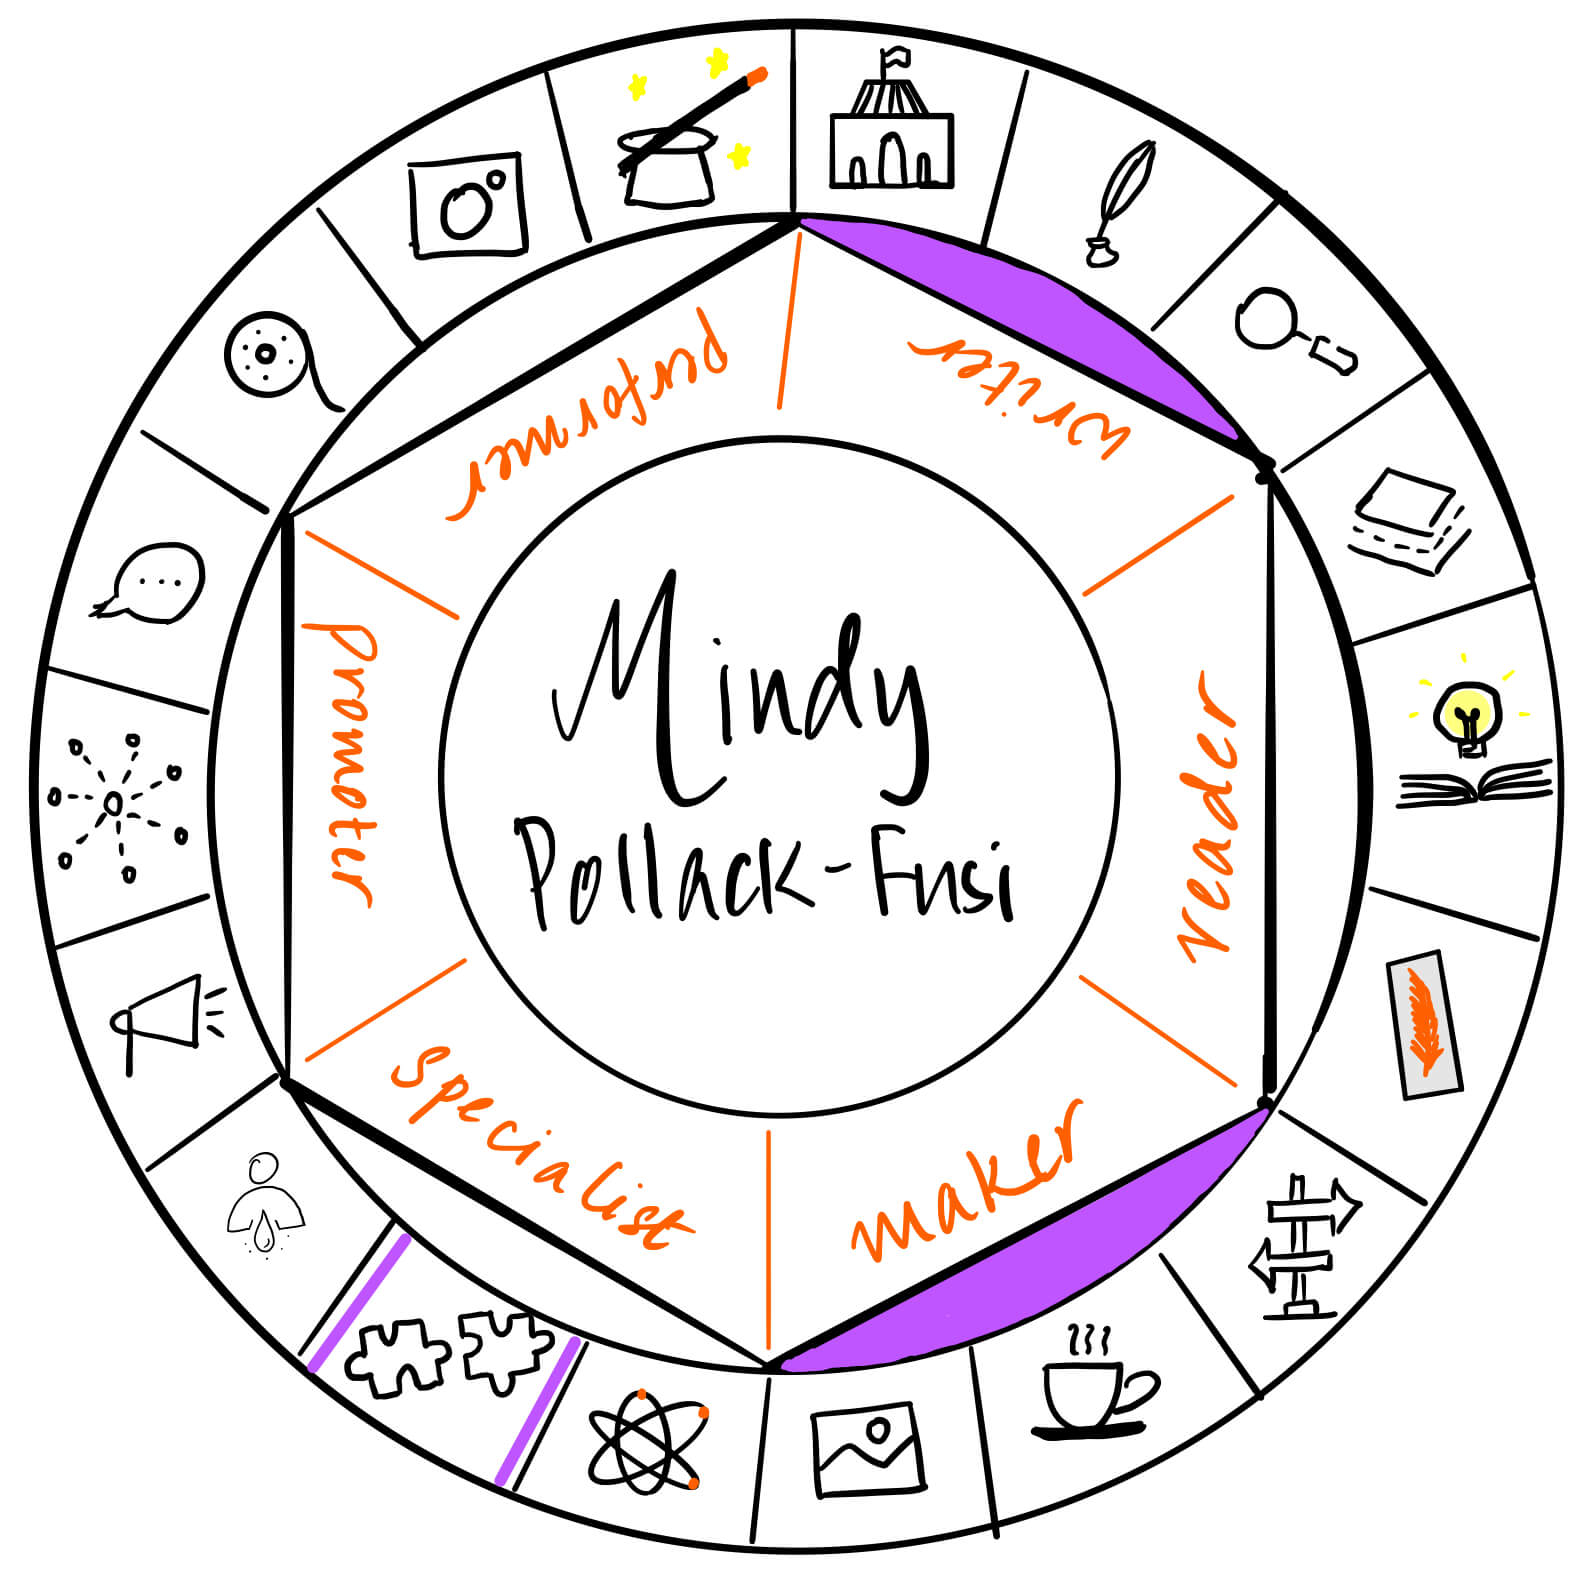 Mindy Pollack-Fusi is a writer and maker. It's a pleasure to have her over on The Creator's Roulette to talk about writing in multiple genres - fiction and non-fiction.